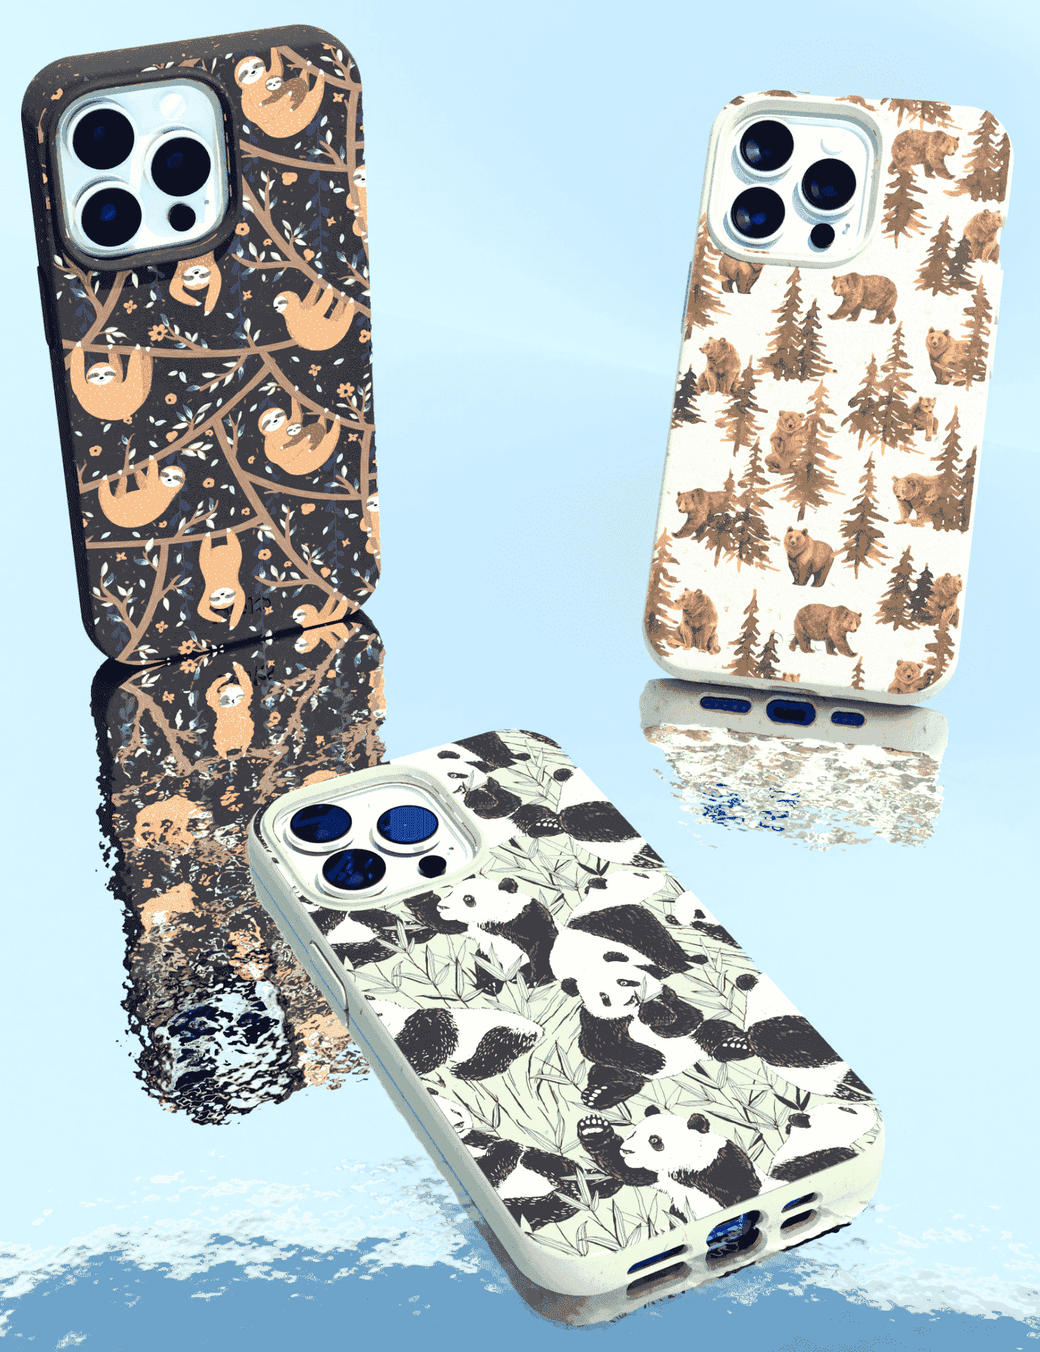 London Fog Into the woods iPhone 6/6s/7/8/SE Case